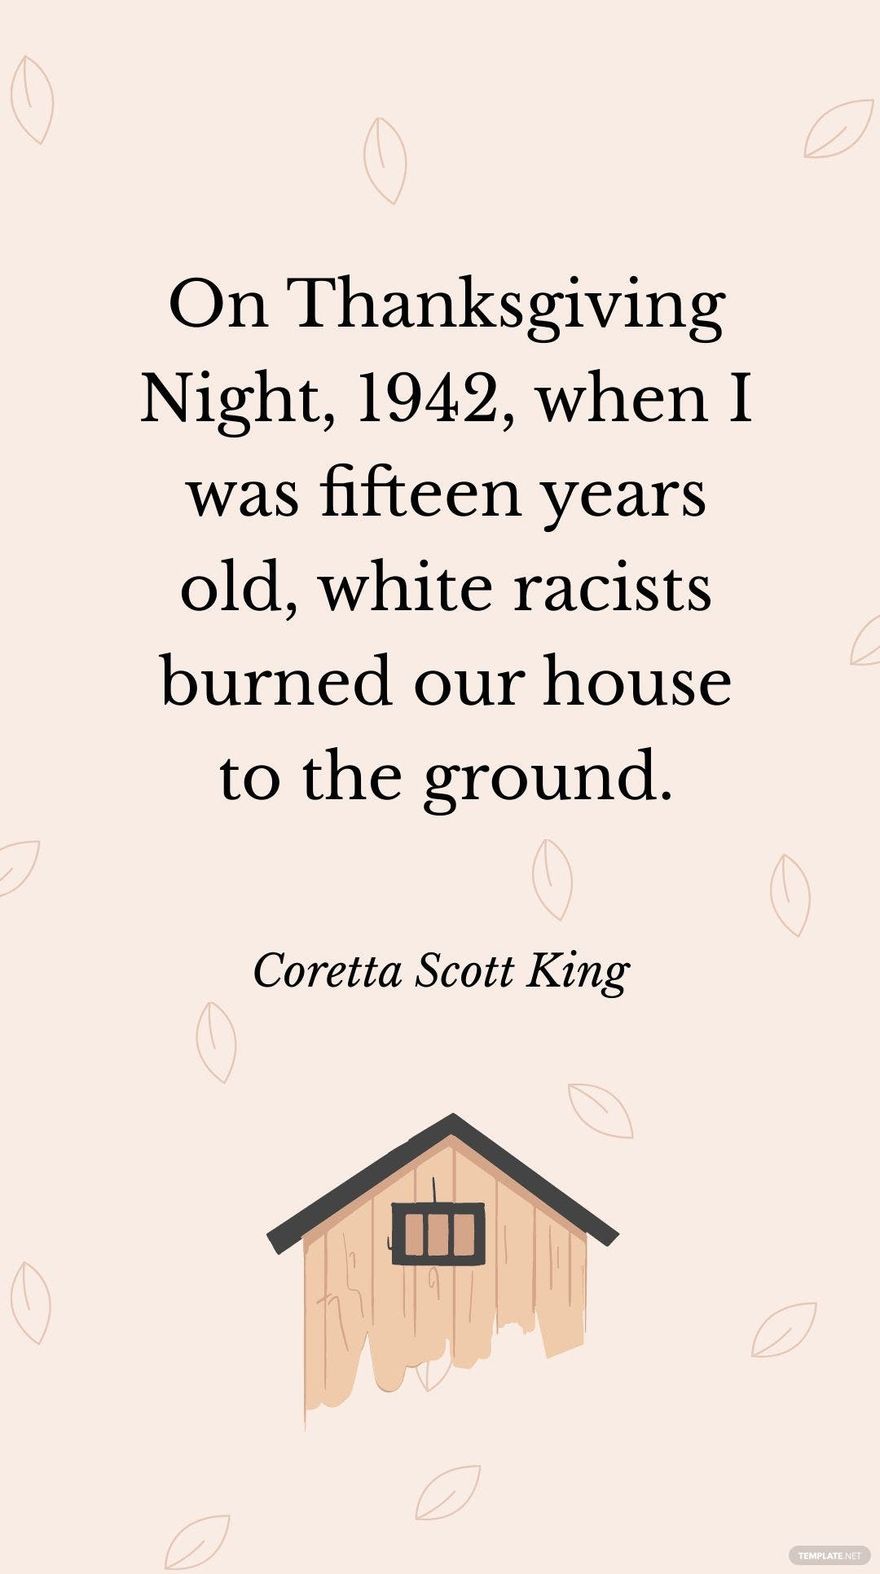 Coretta Scott King - On Thanksgiving Night, 1942, when I was fifteen years old, white racists burned our house to the ground.